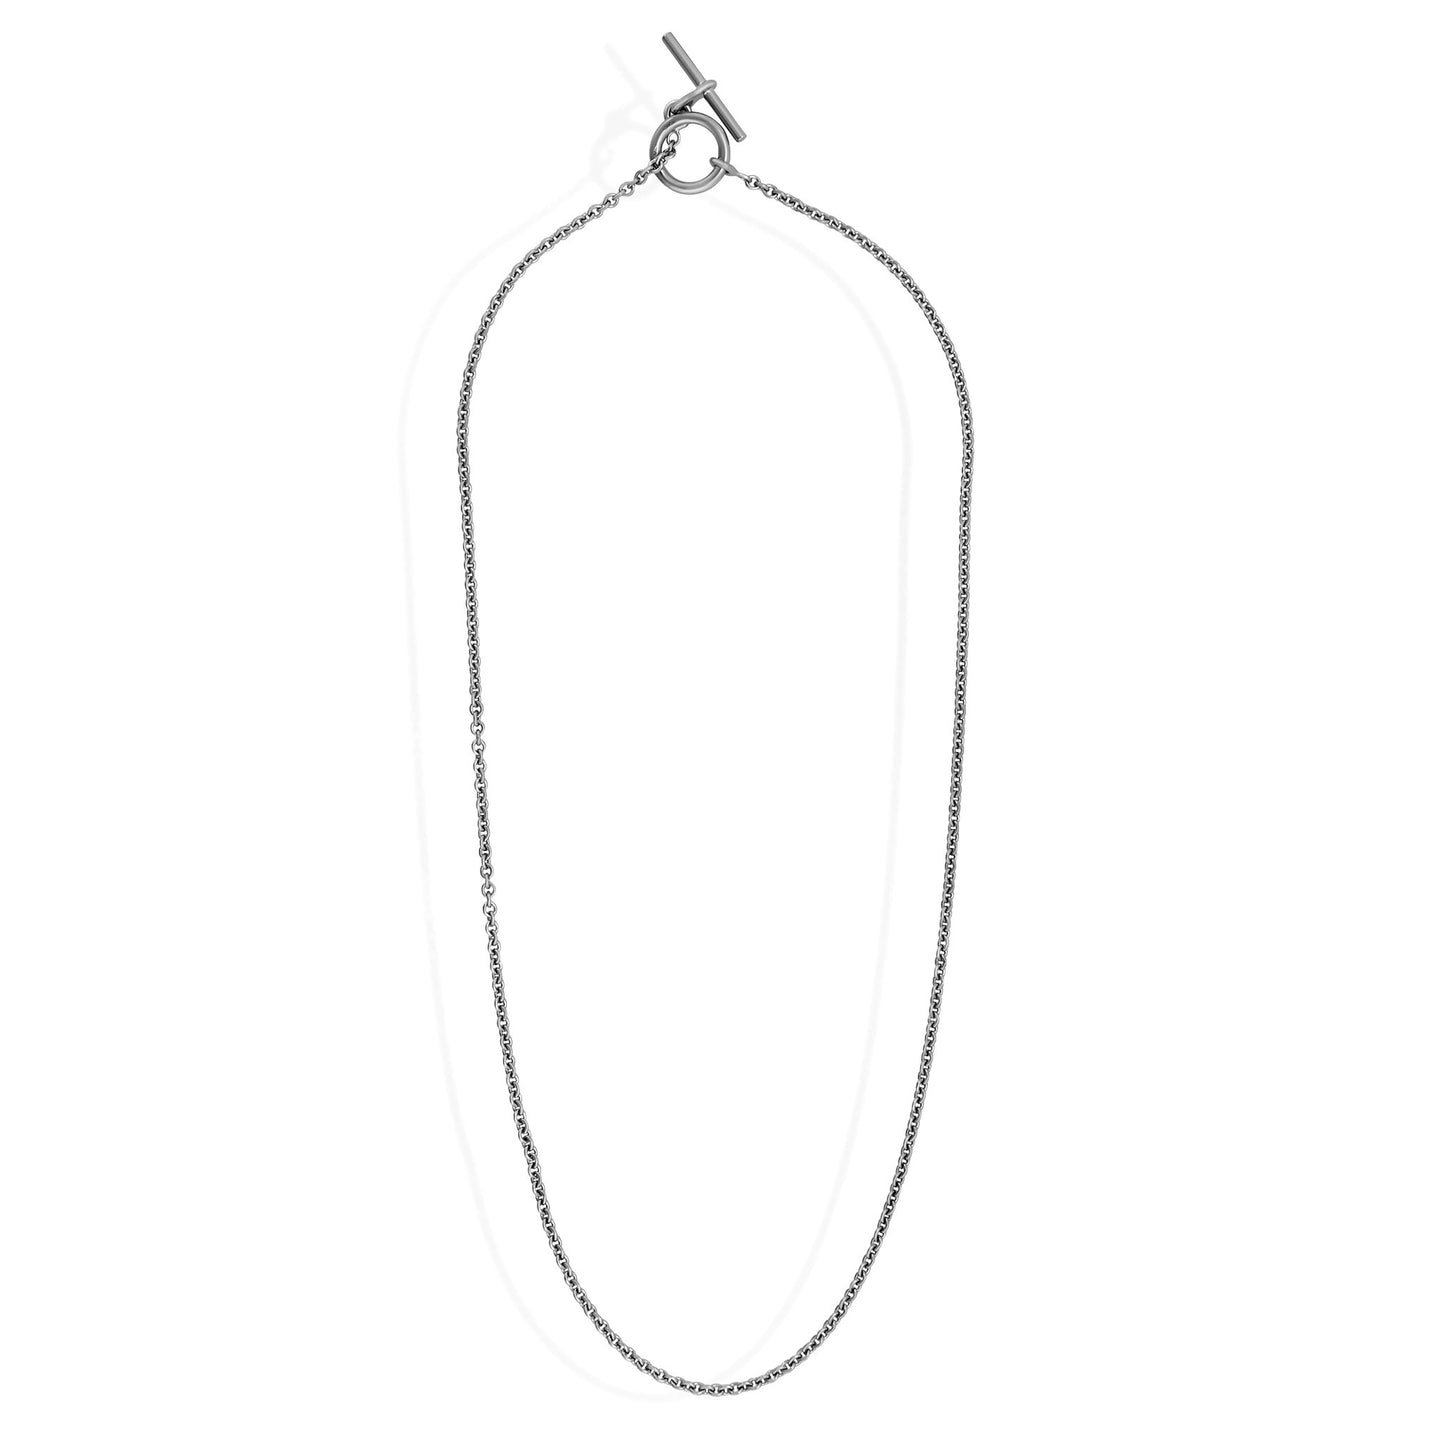 Hermes 18K White Gold Mini Chaine D'ancre Necklace Length: 15"